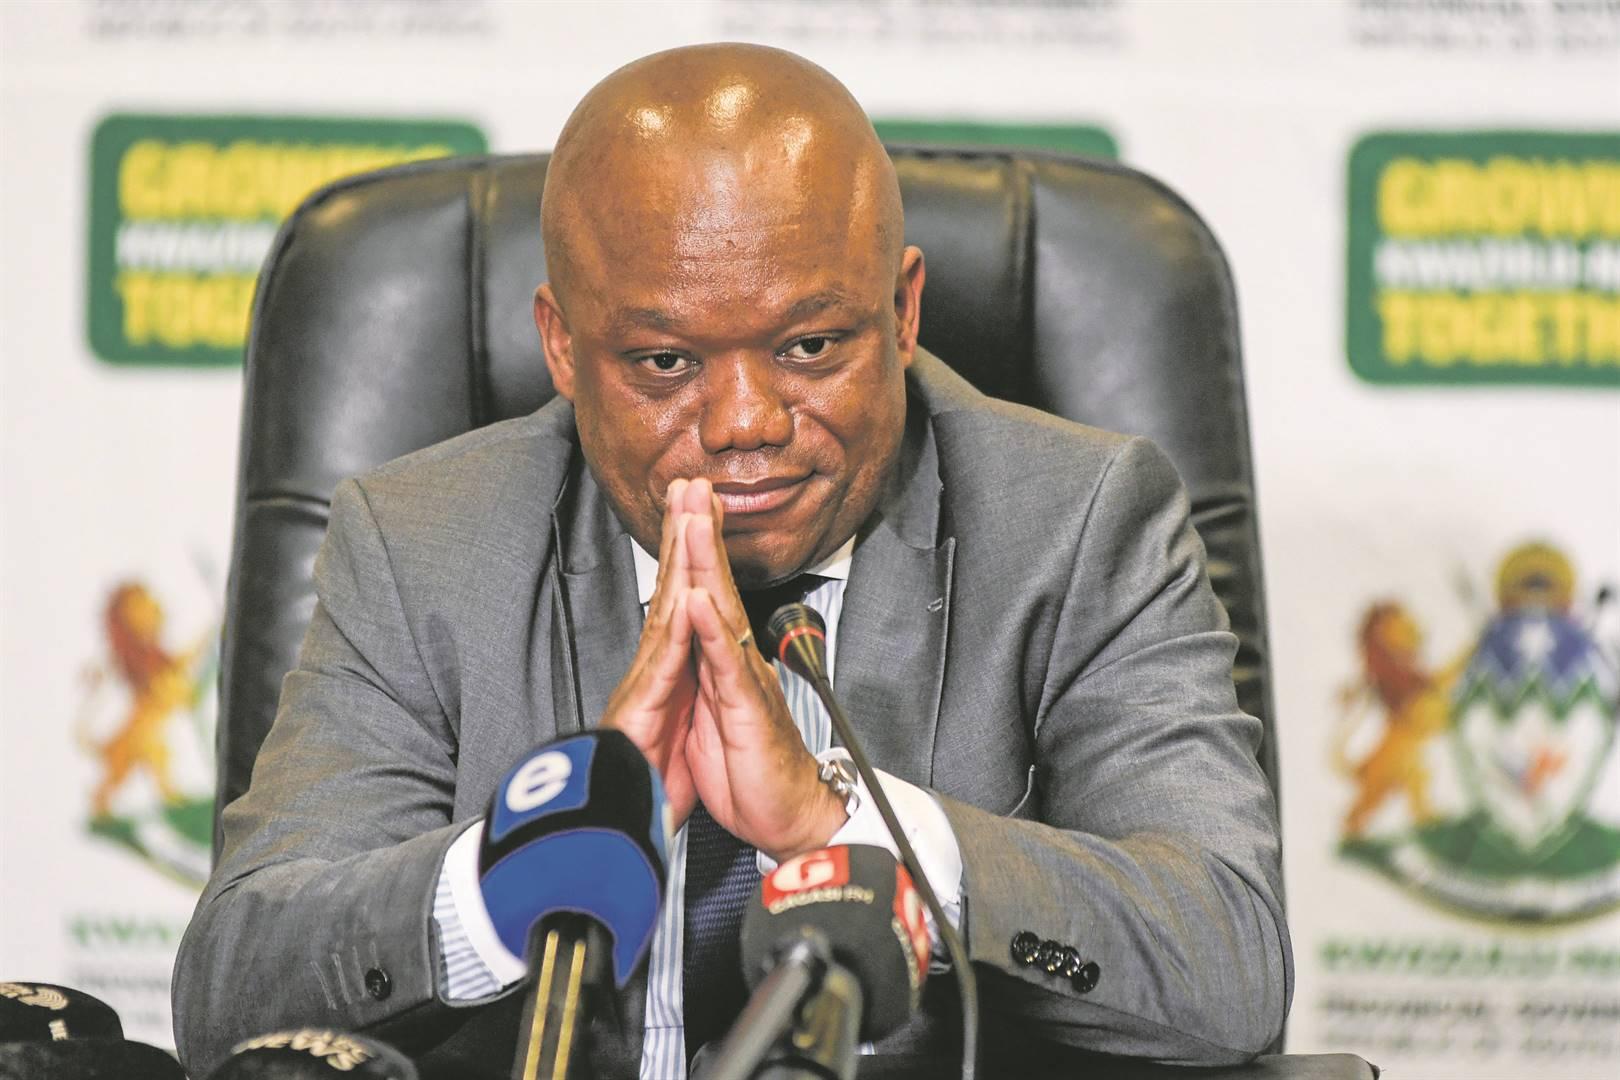 KwaZulu-Natal ANC confirms Sihle Zikalala’s redeployment to the national government